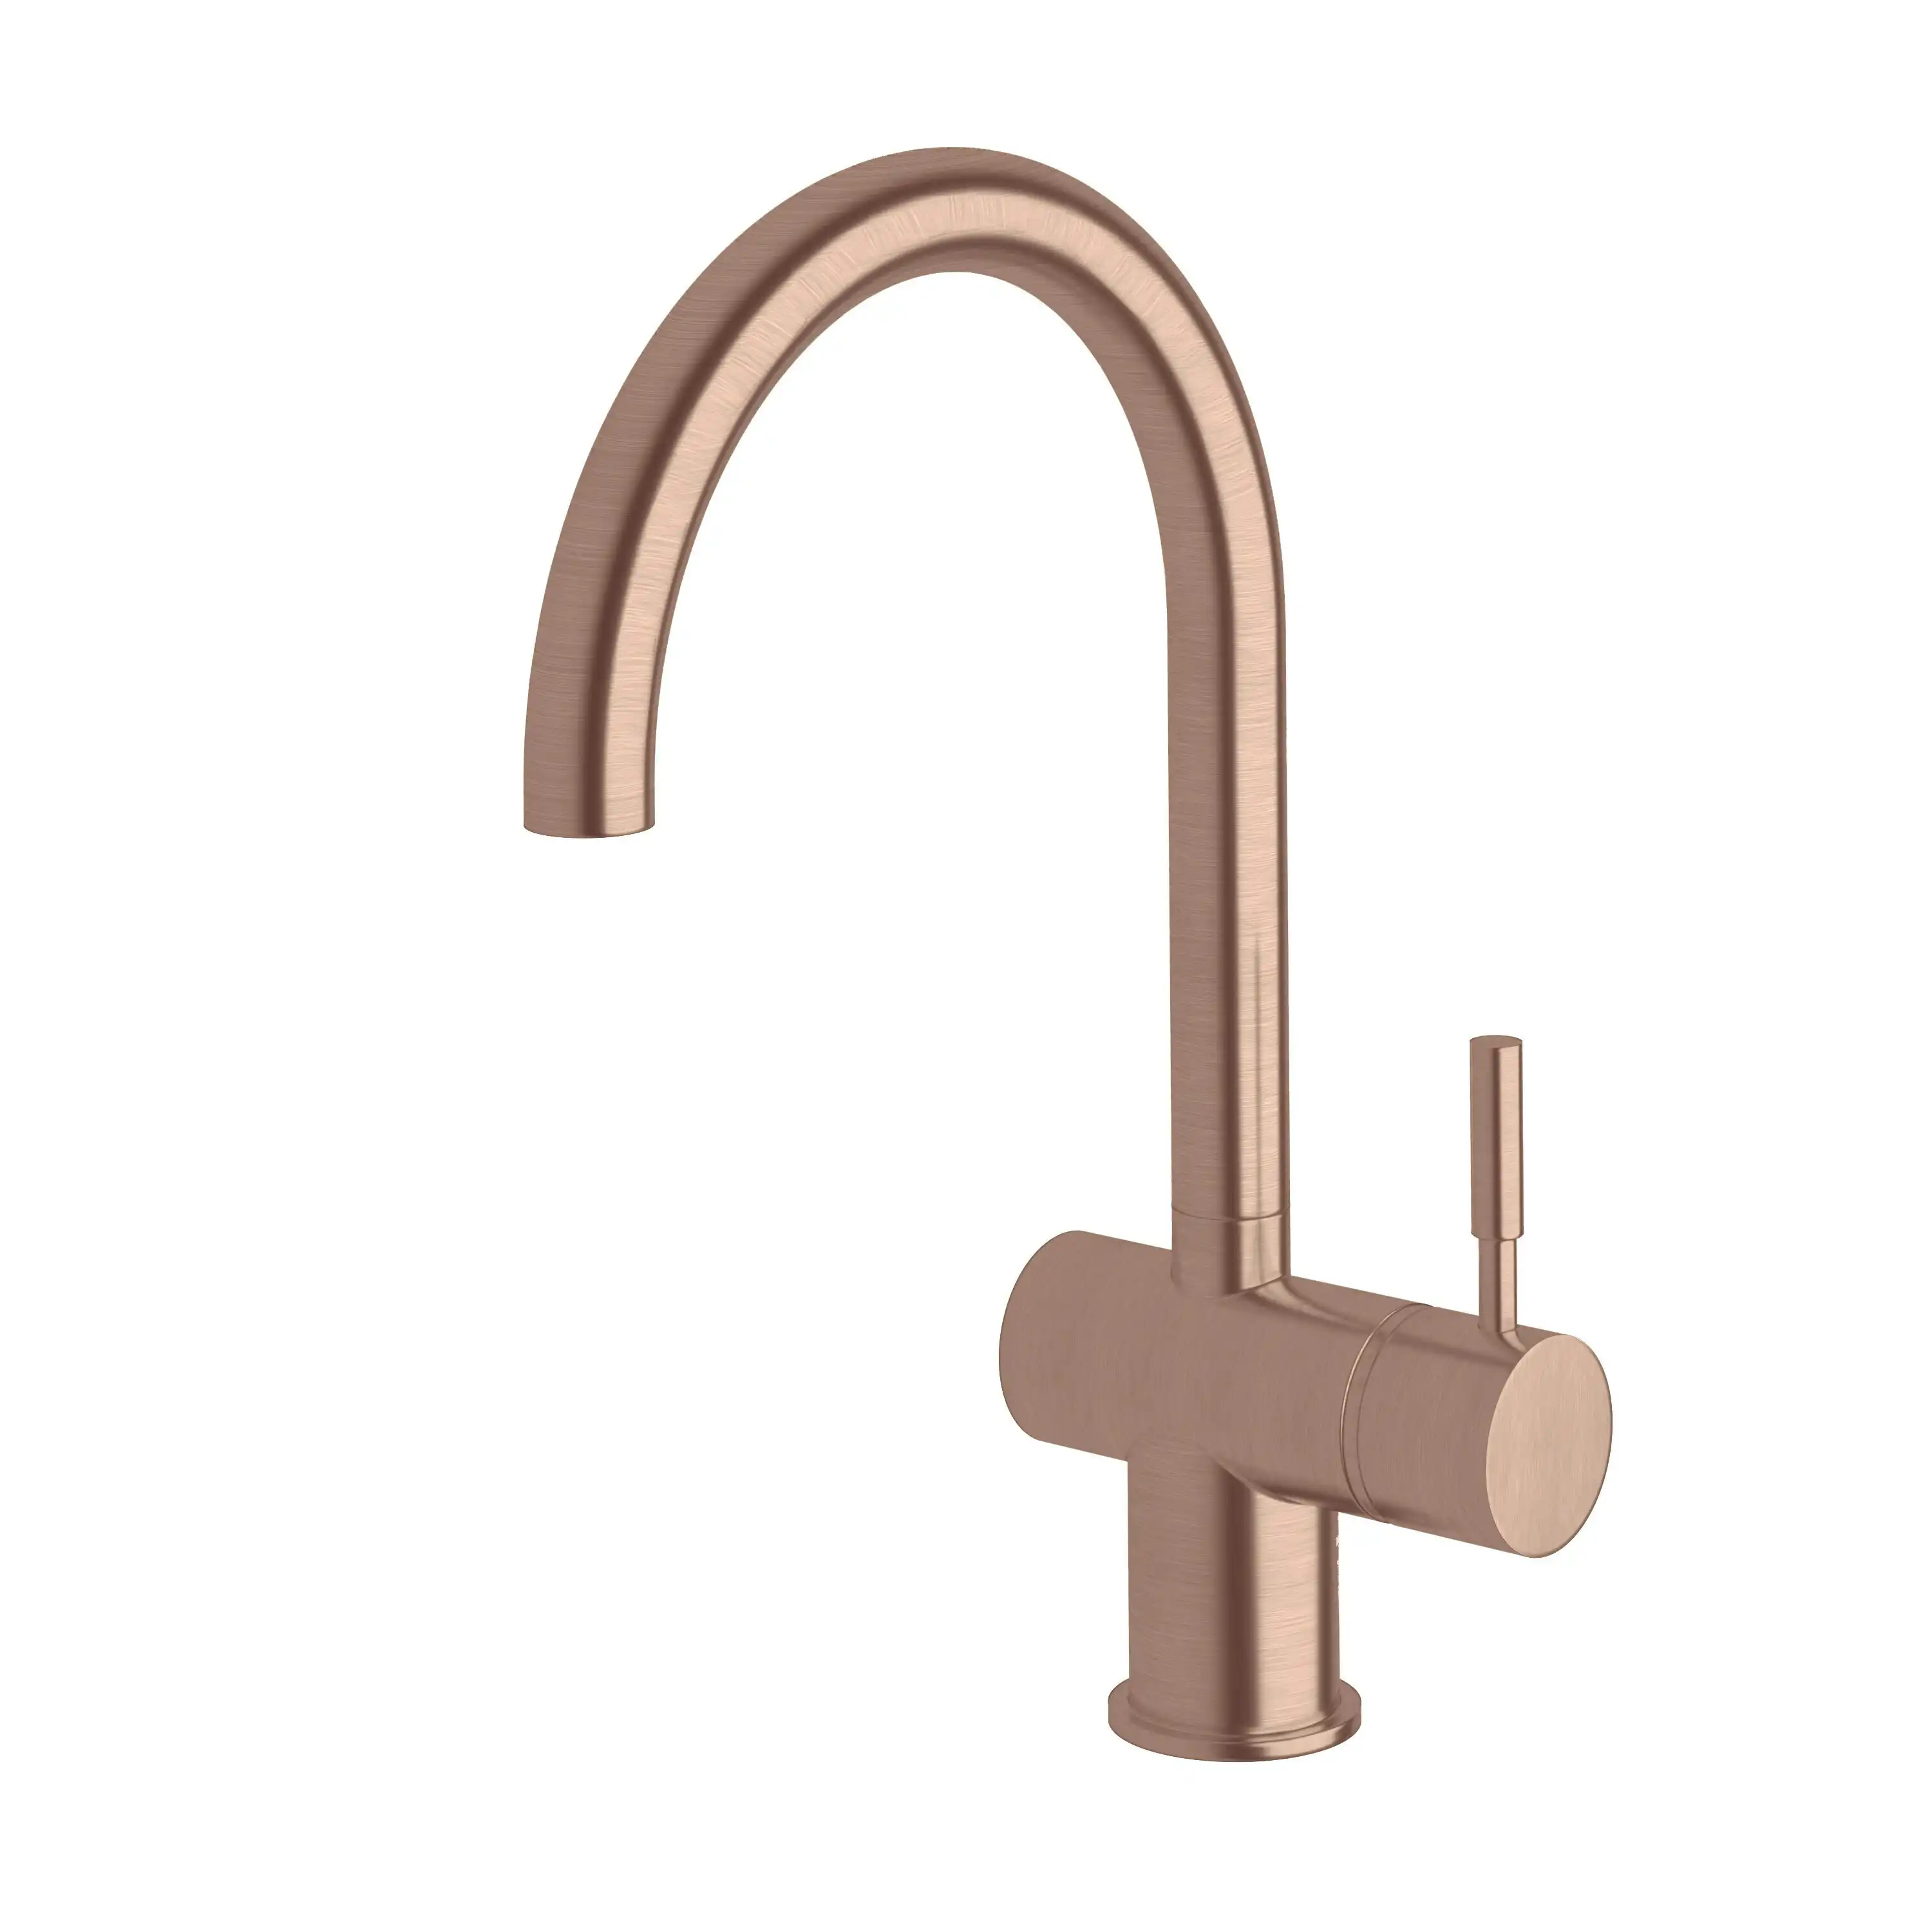 Sussex Taps Voda Curved Sink Mixer Tap - Brushed Rose Gold